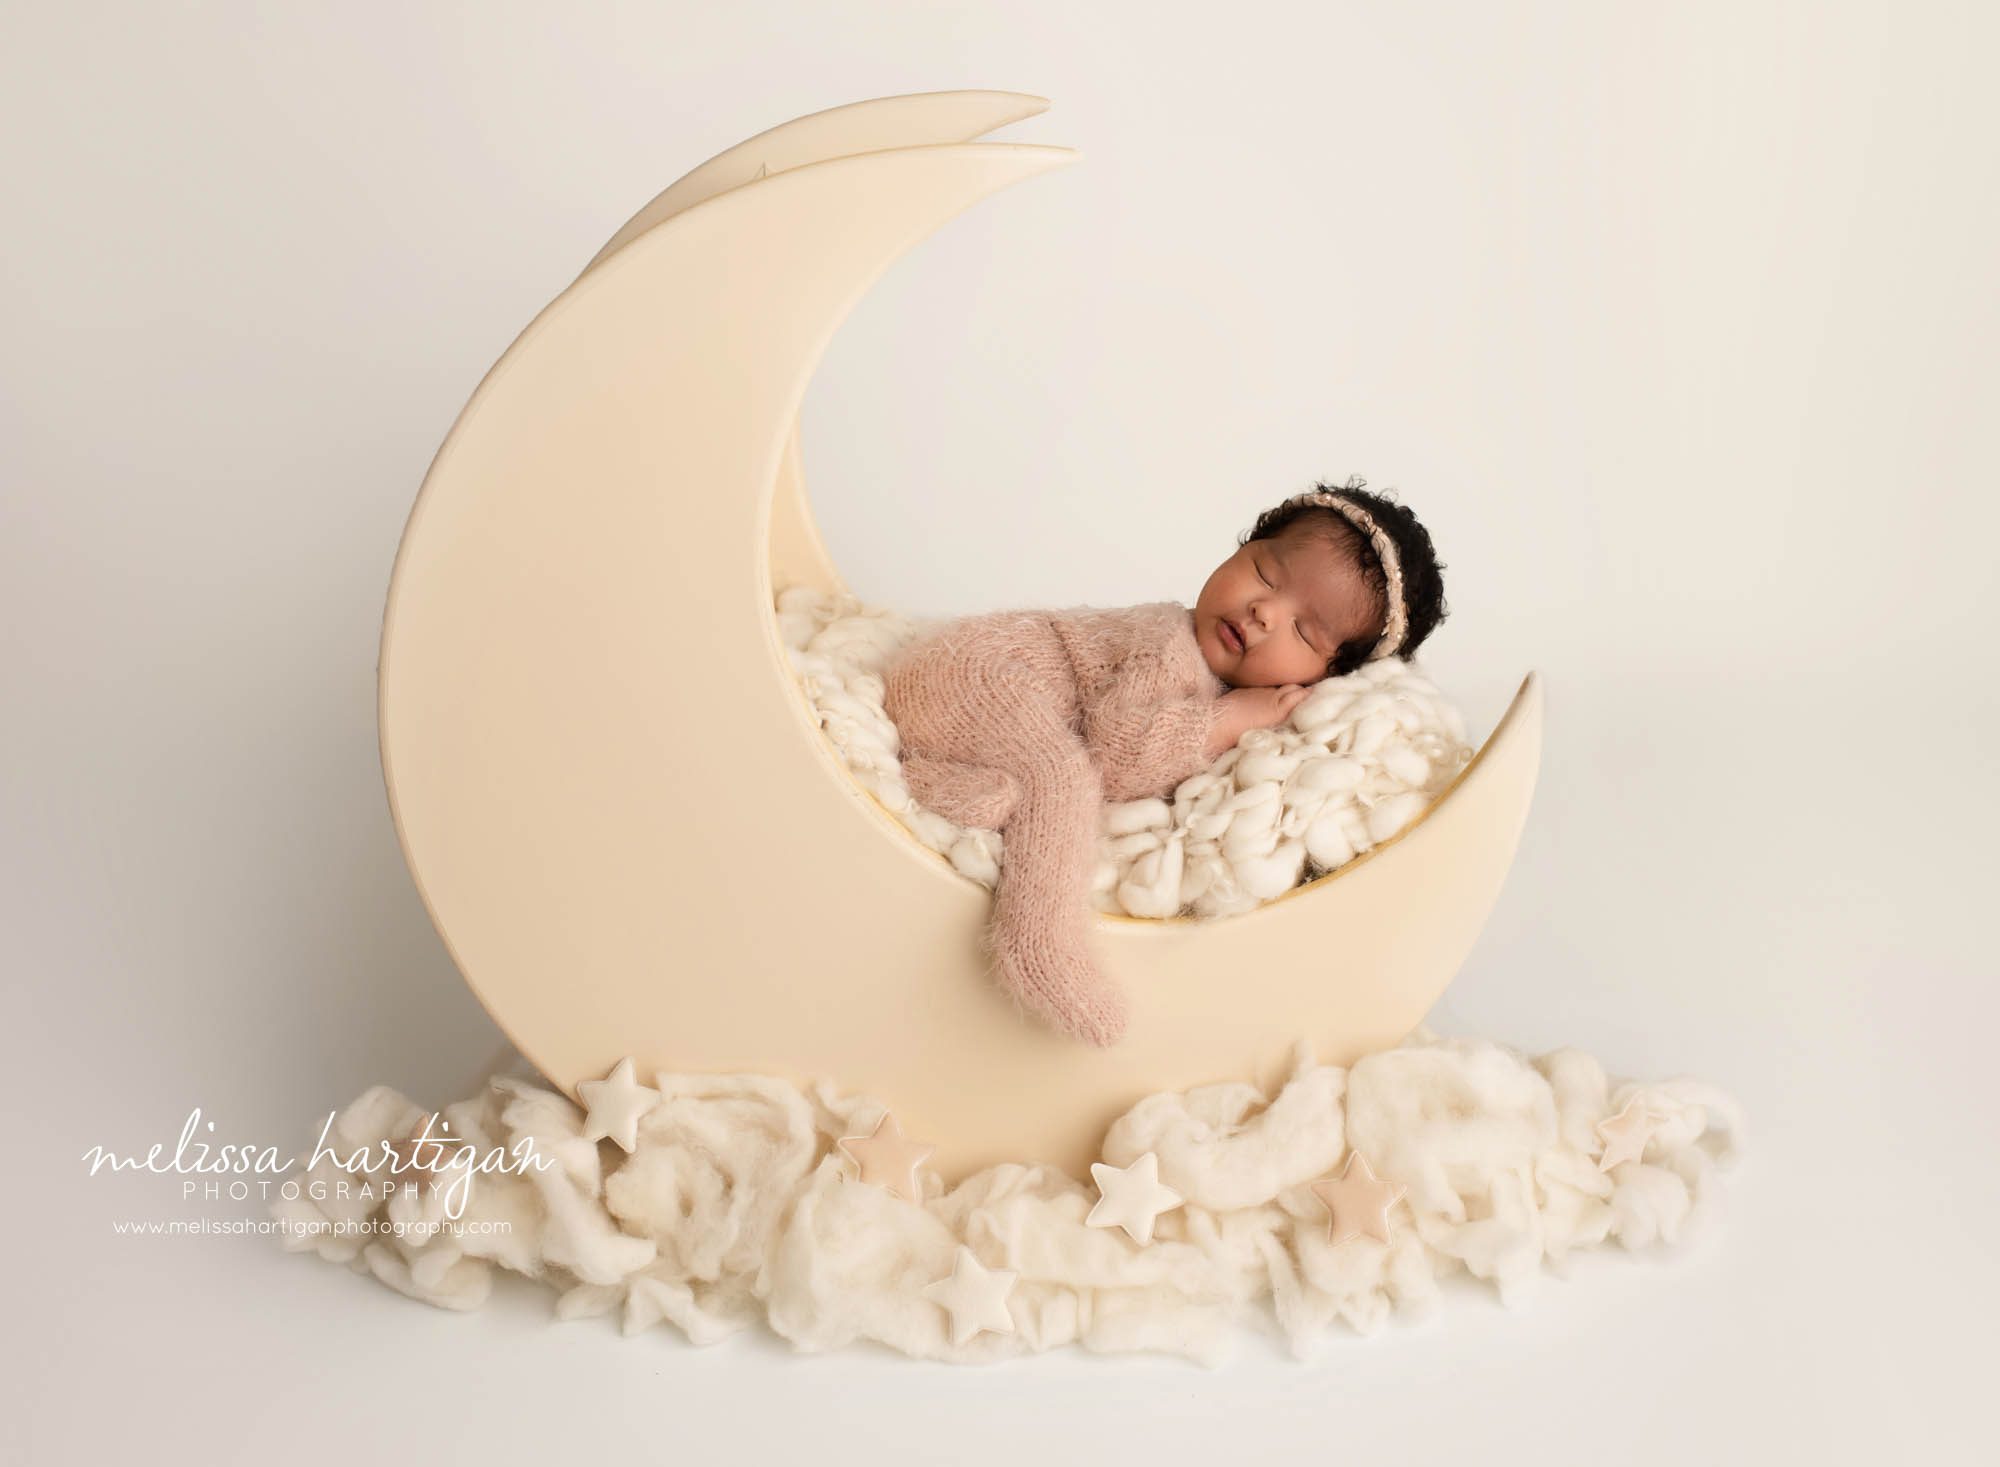 newborn baby girl posed in wooden moon prop wearing pink knitted footed sleeper